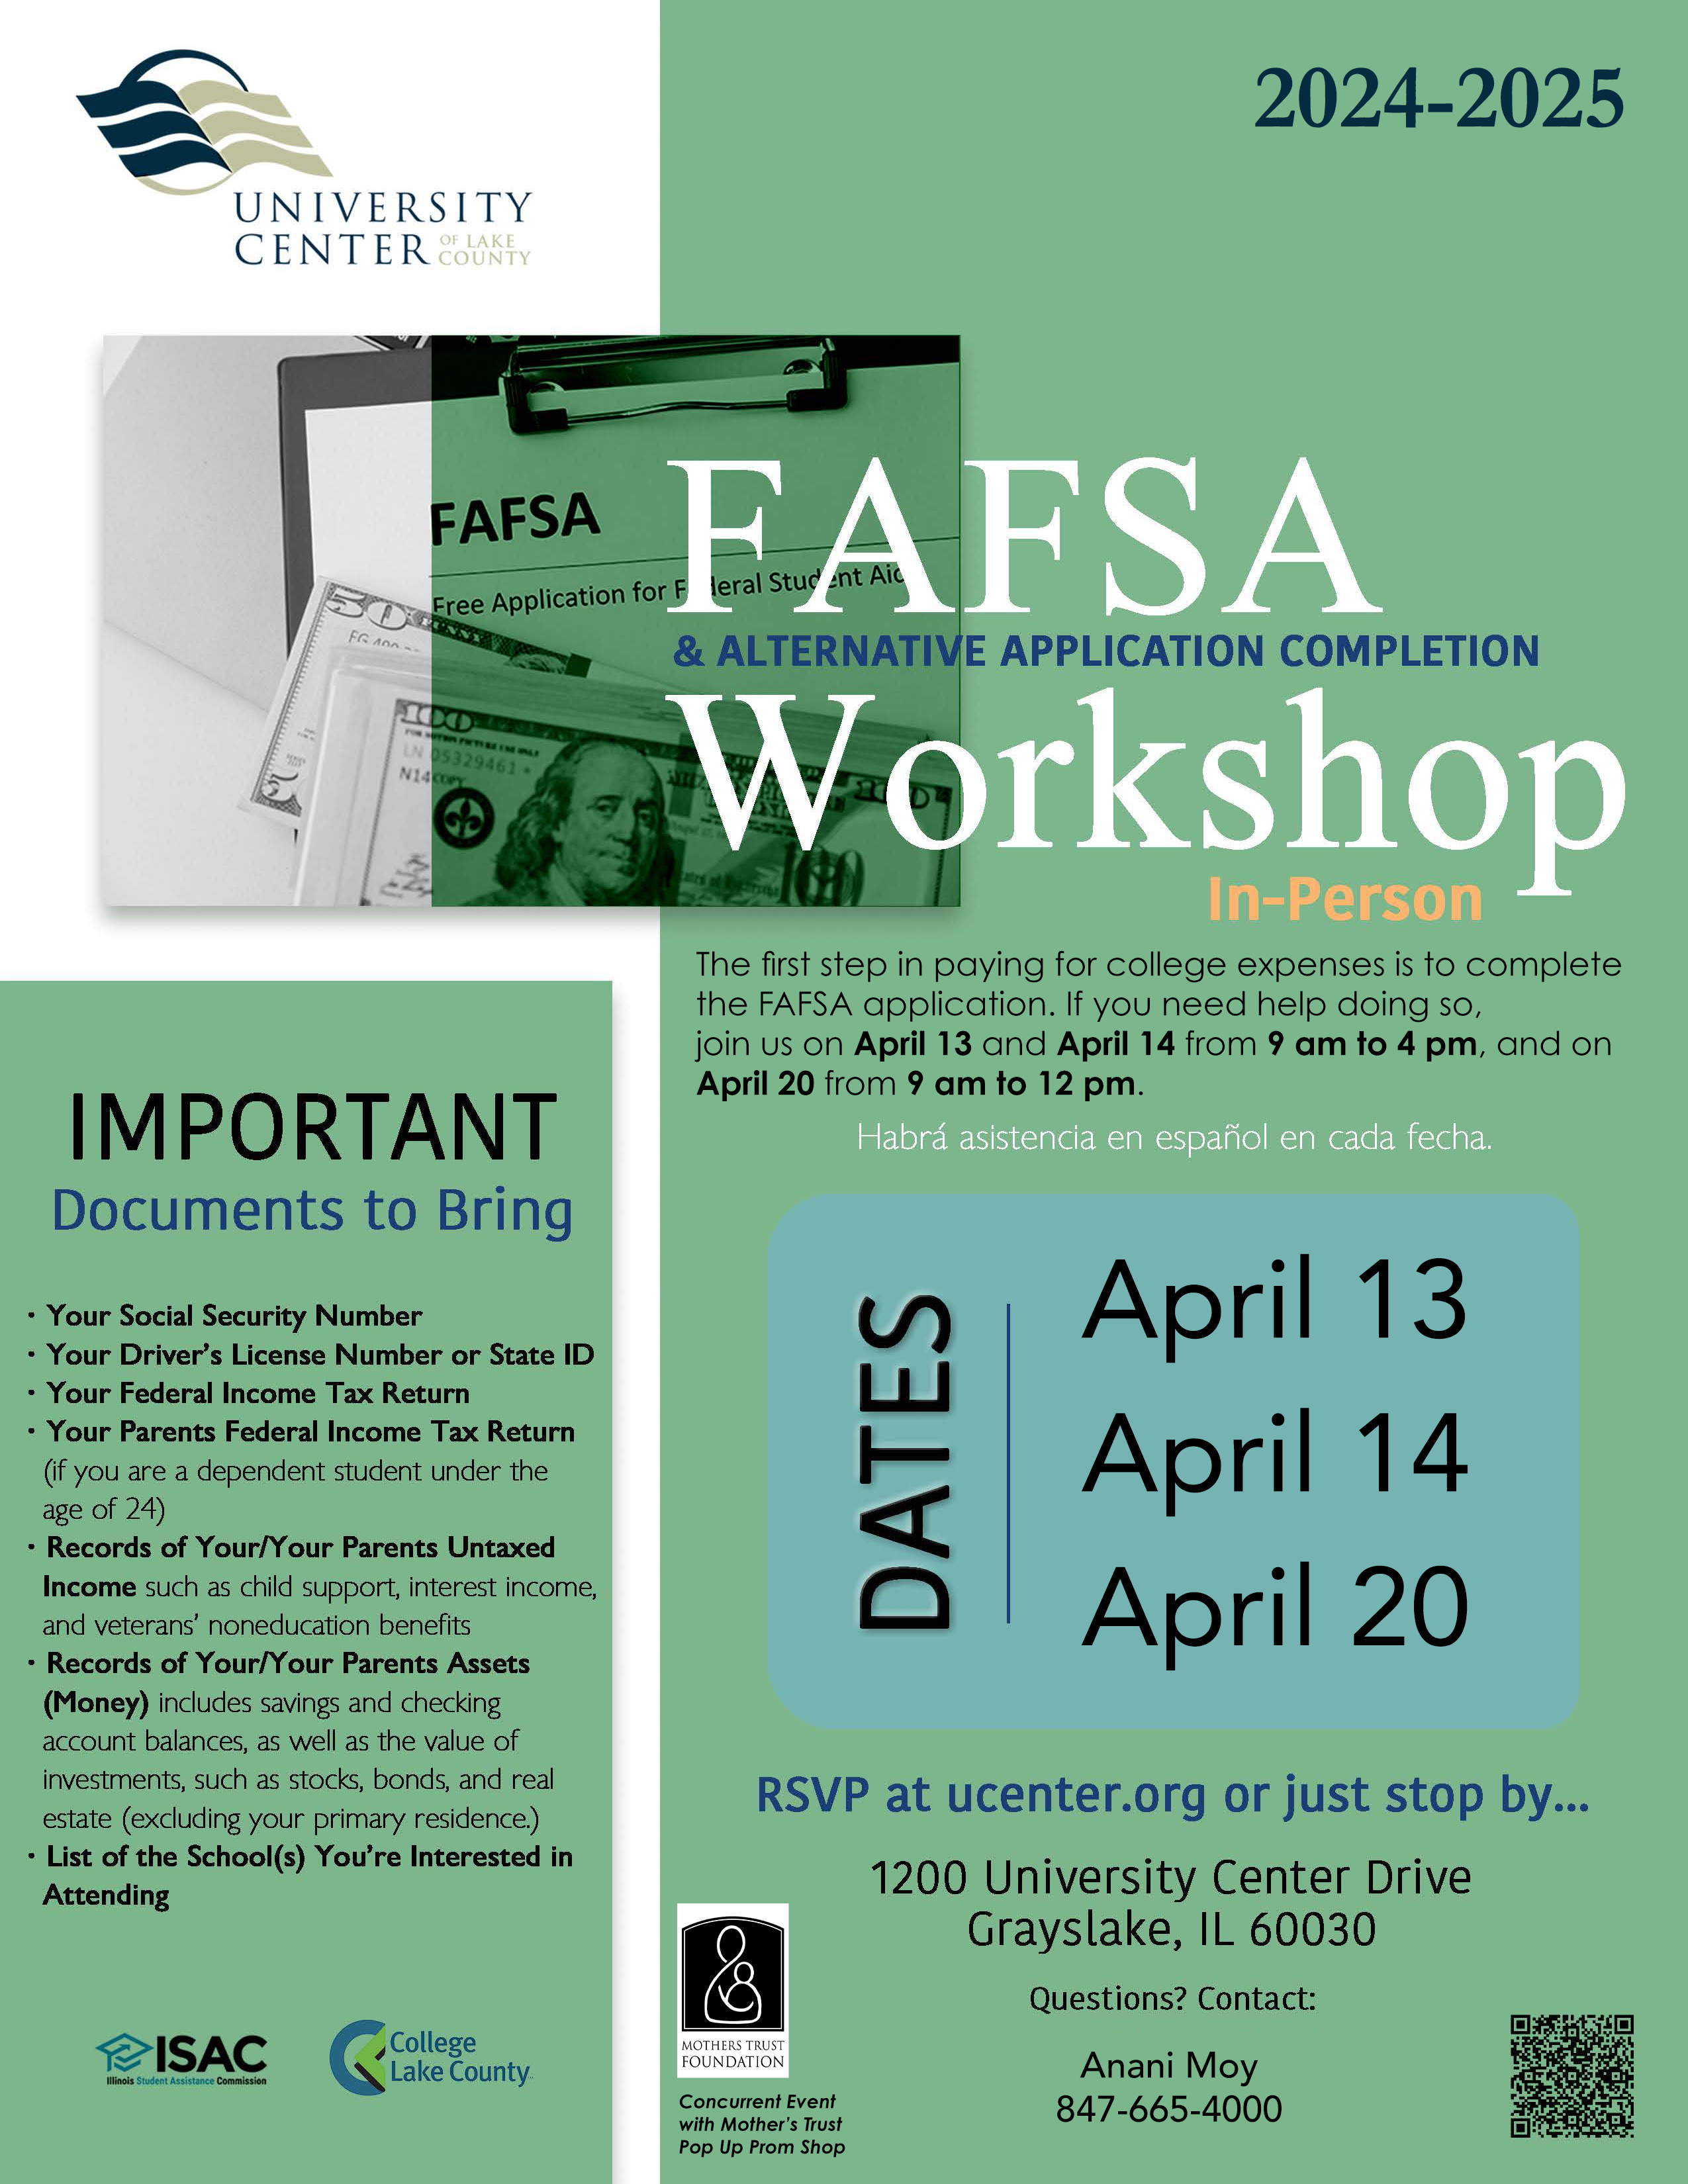 FAFSA Workshop and Alternative Application Completion at University Center of Lake County